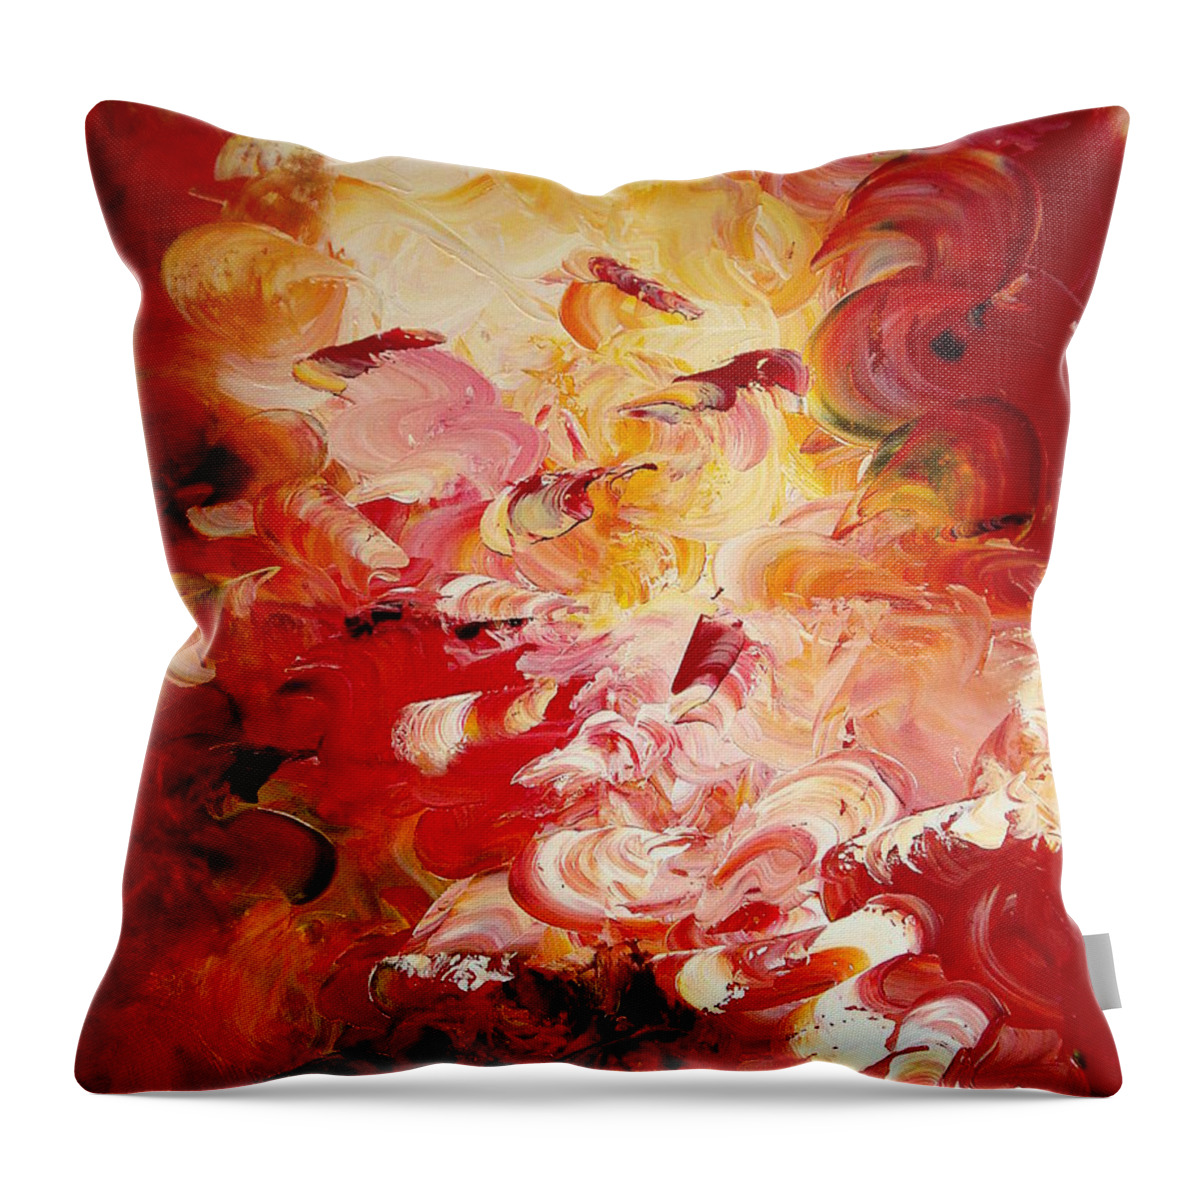 Abstract Throw Pillow featuring the painting Senteurs exquises by Isabelle Vobmann